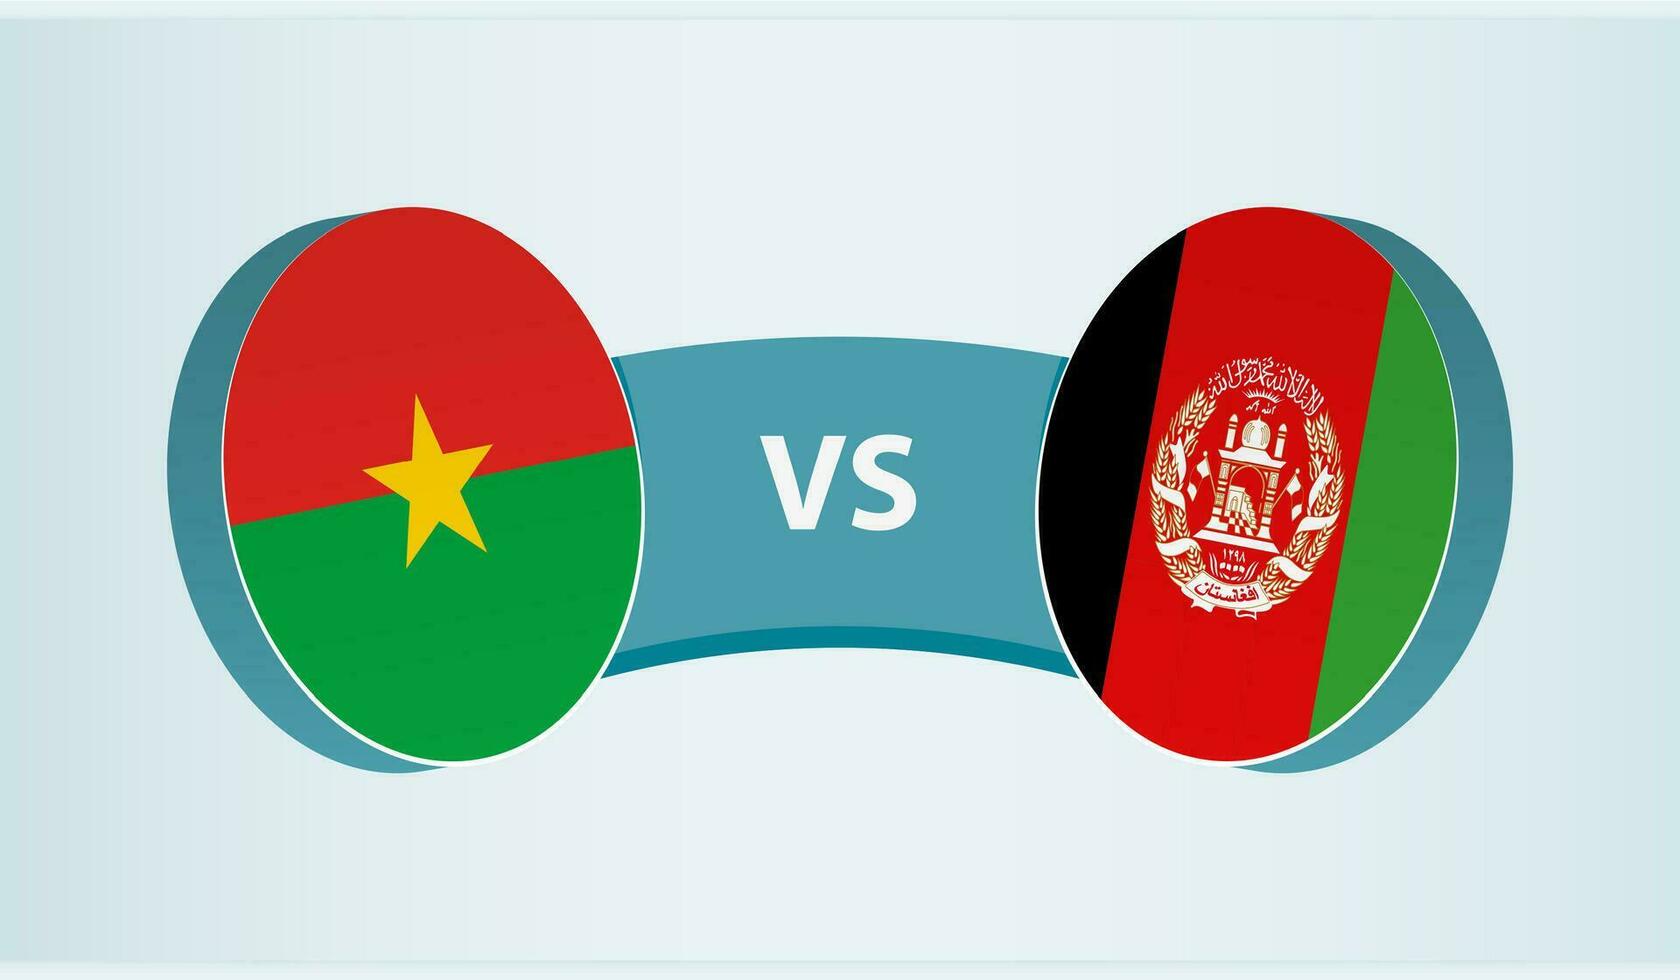 Burkina Faso versus Afghanistan, team sports competition concept. vector